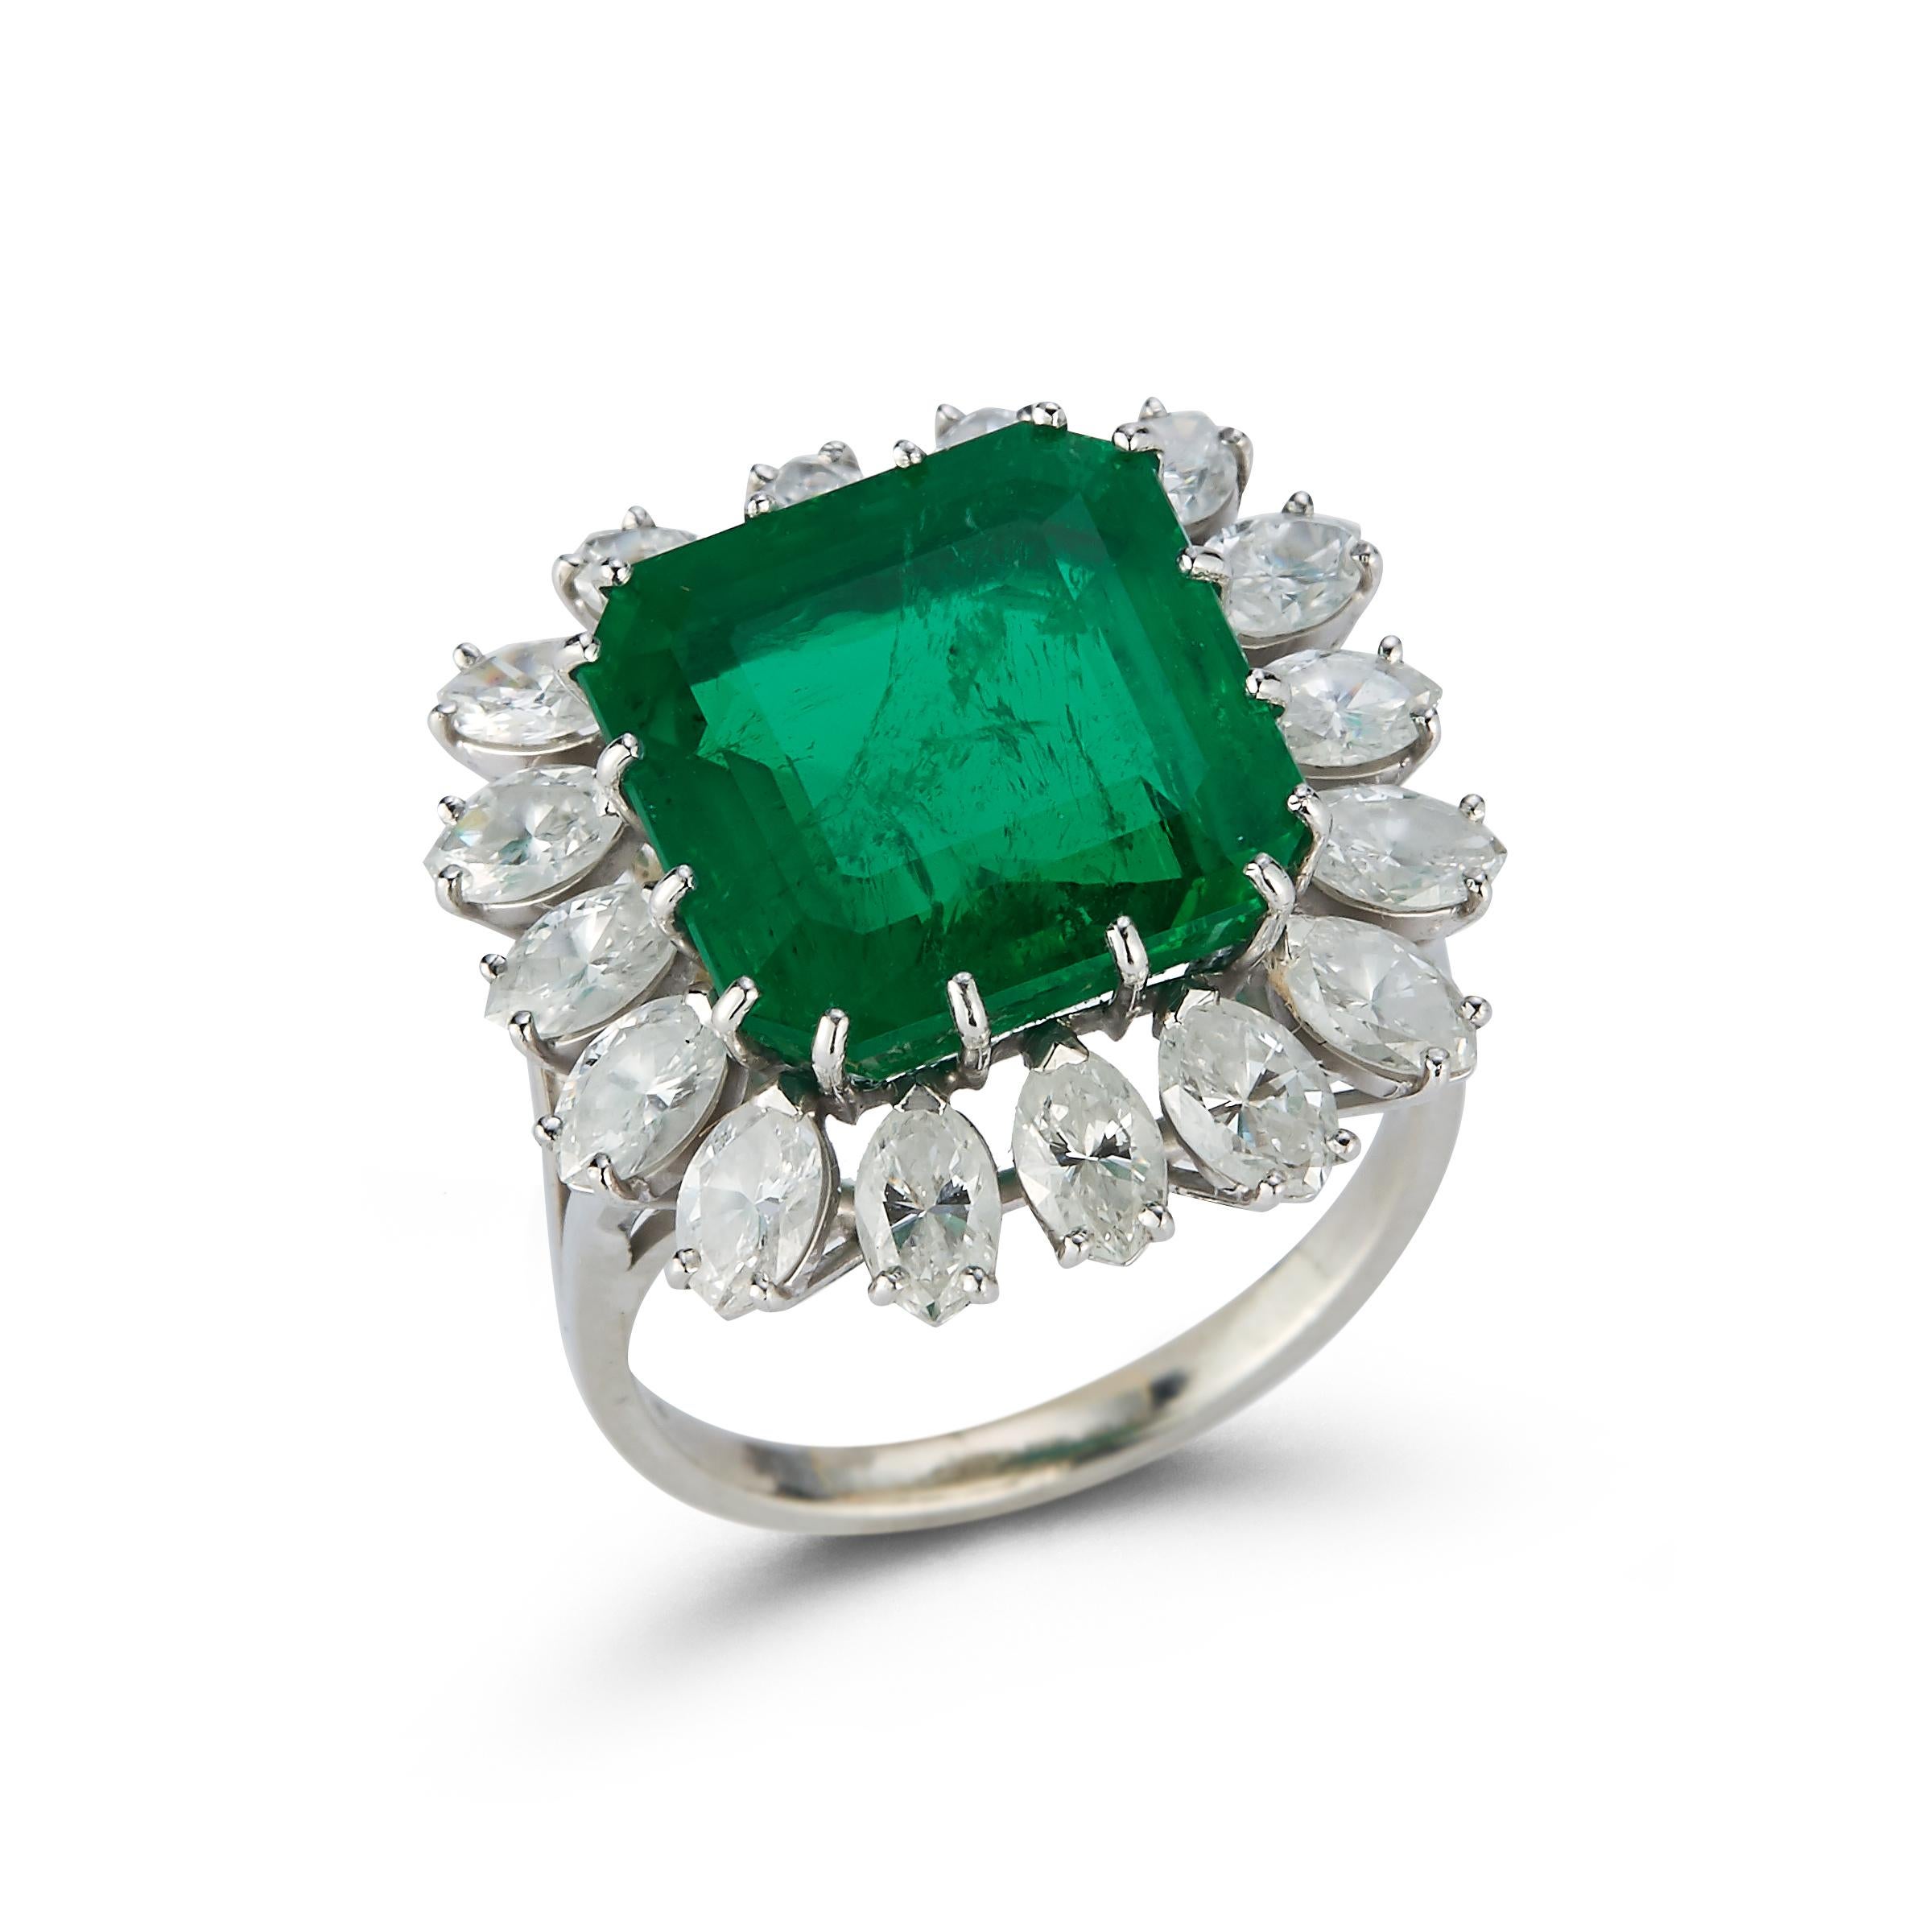 Estate Jewelry Curated by Parulina- This stunning 8.30ct Emerald is accented with approximately 3.00cts of Diamonds set in 18K White Gold. 
No oil treatment on Emerald.
Ring Size 6

Metal: 18K White Gold
Gemstone Carat Weight: 8.30ct Emerald
Diamond